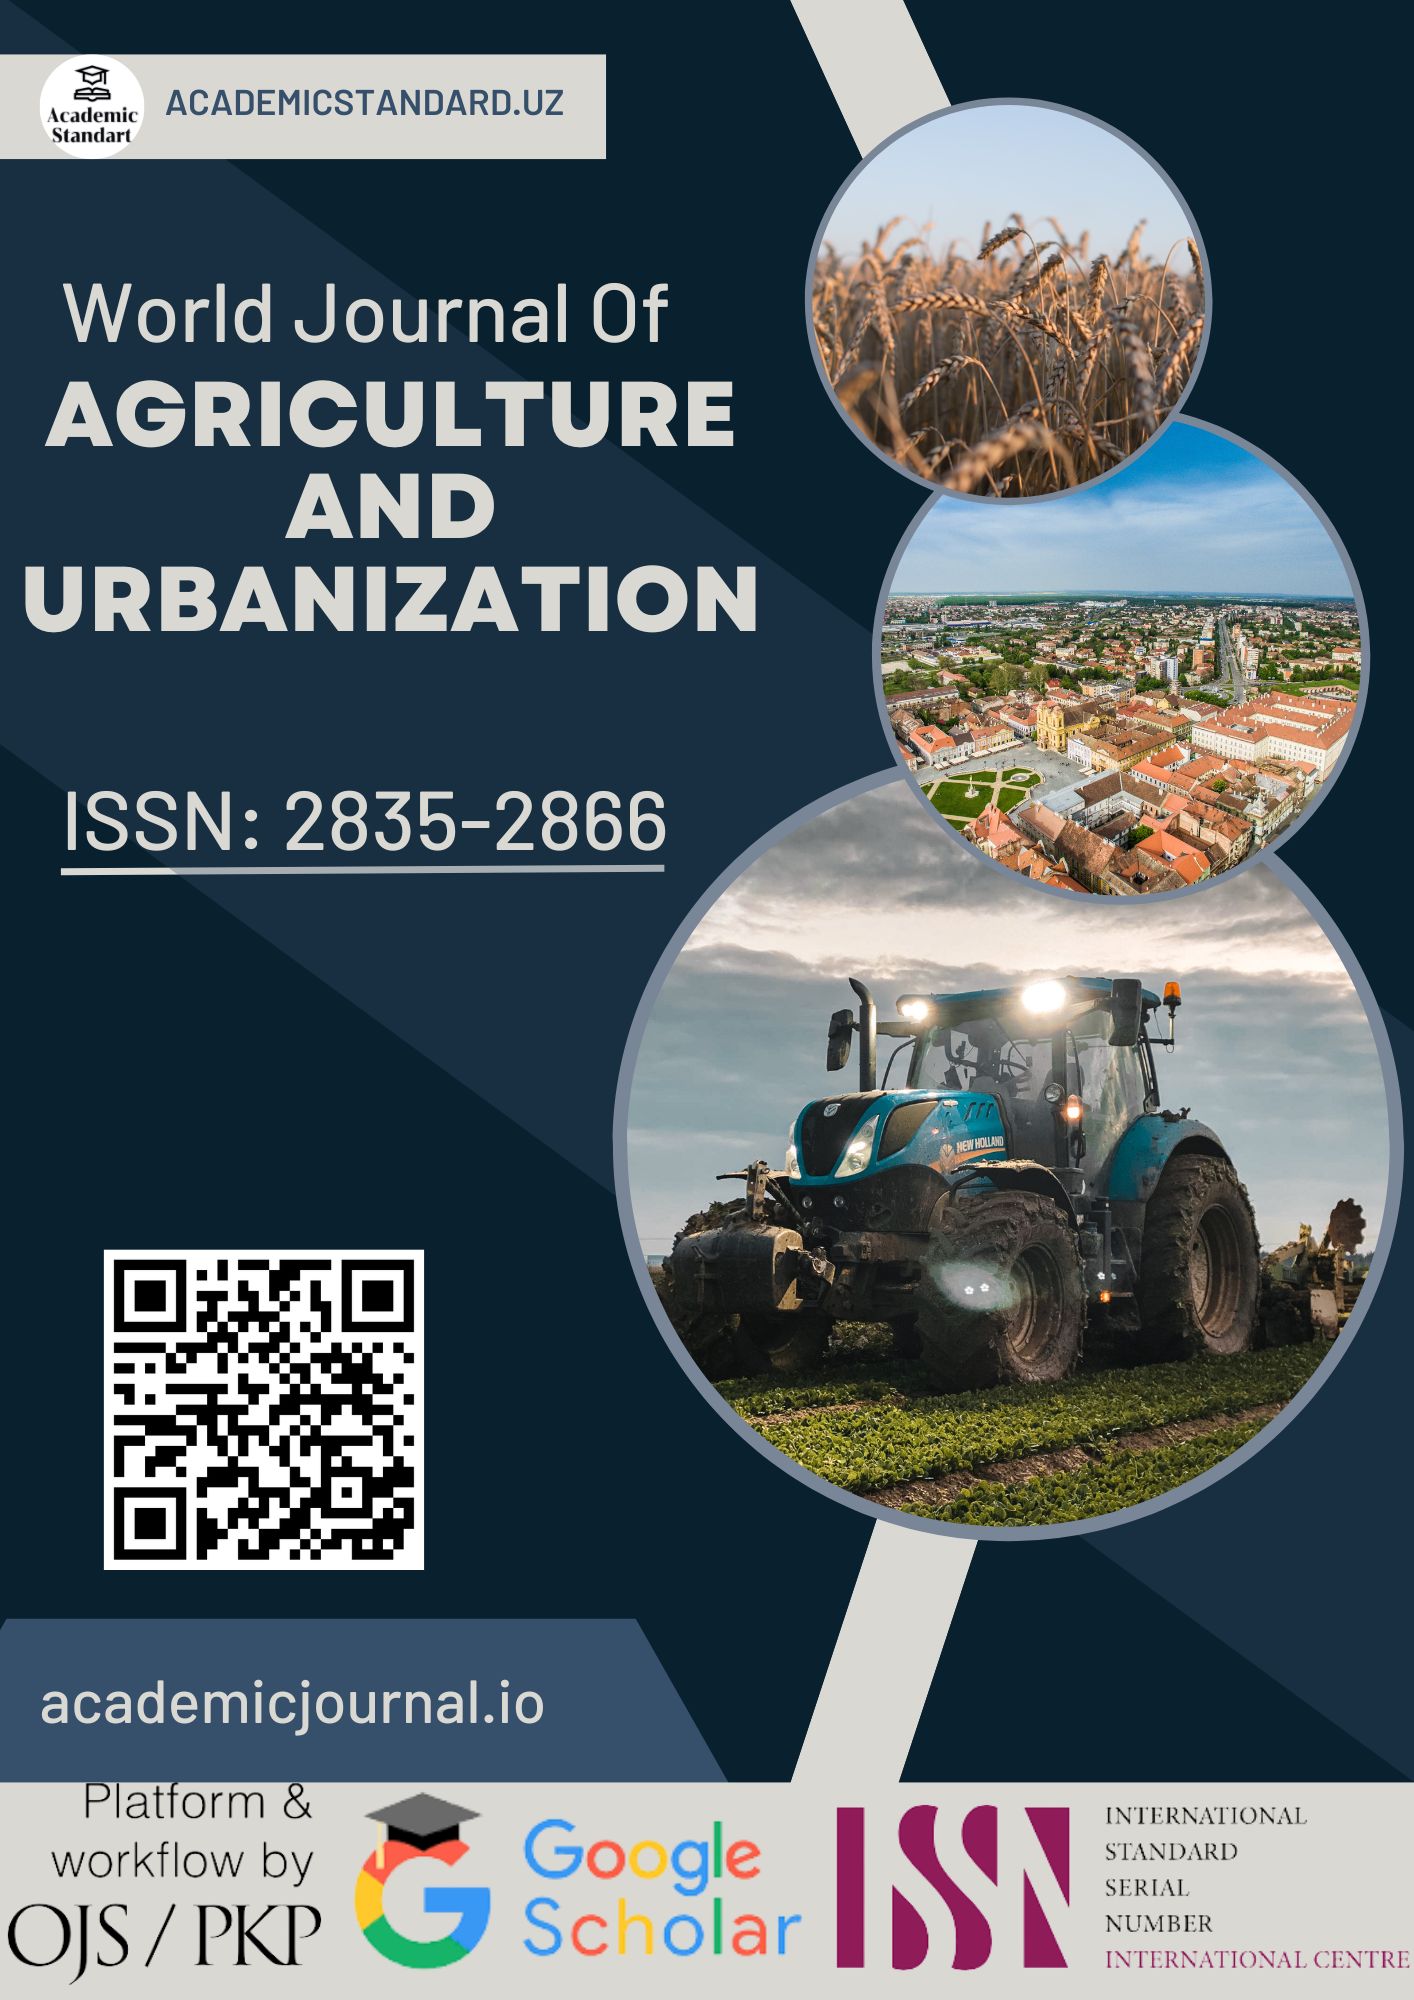 World Journal of Agriculture and Urbanization